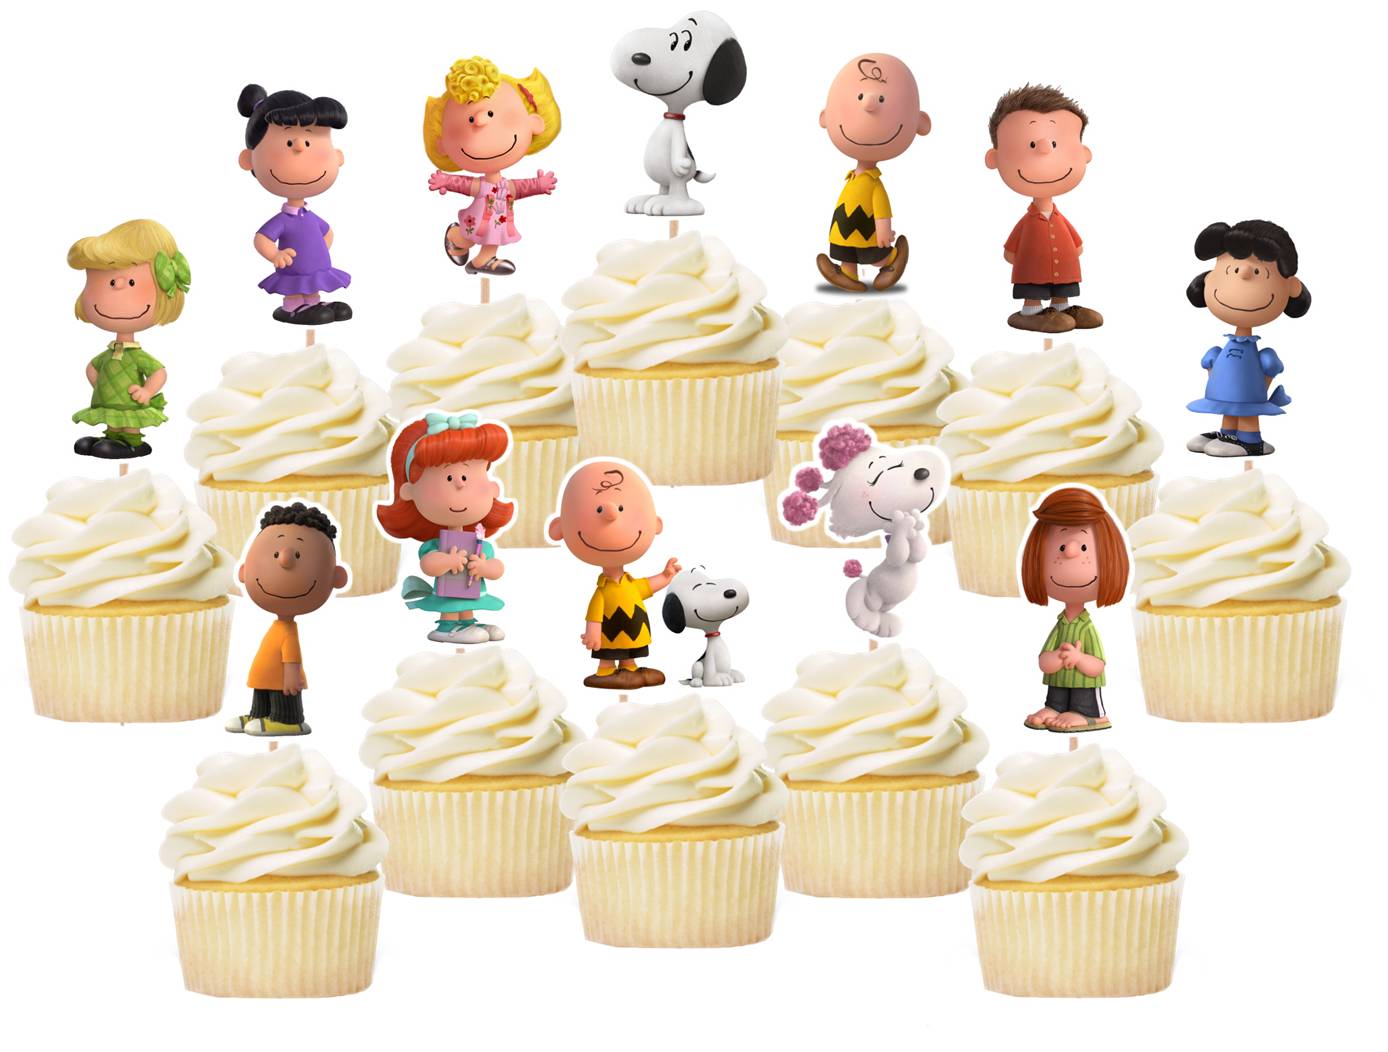 Snoopy and Friends Cupcake Kit: Decorate